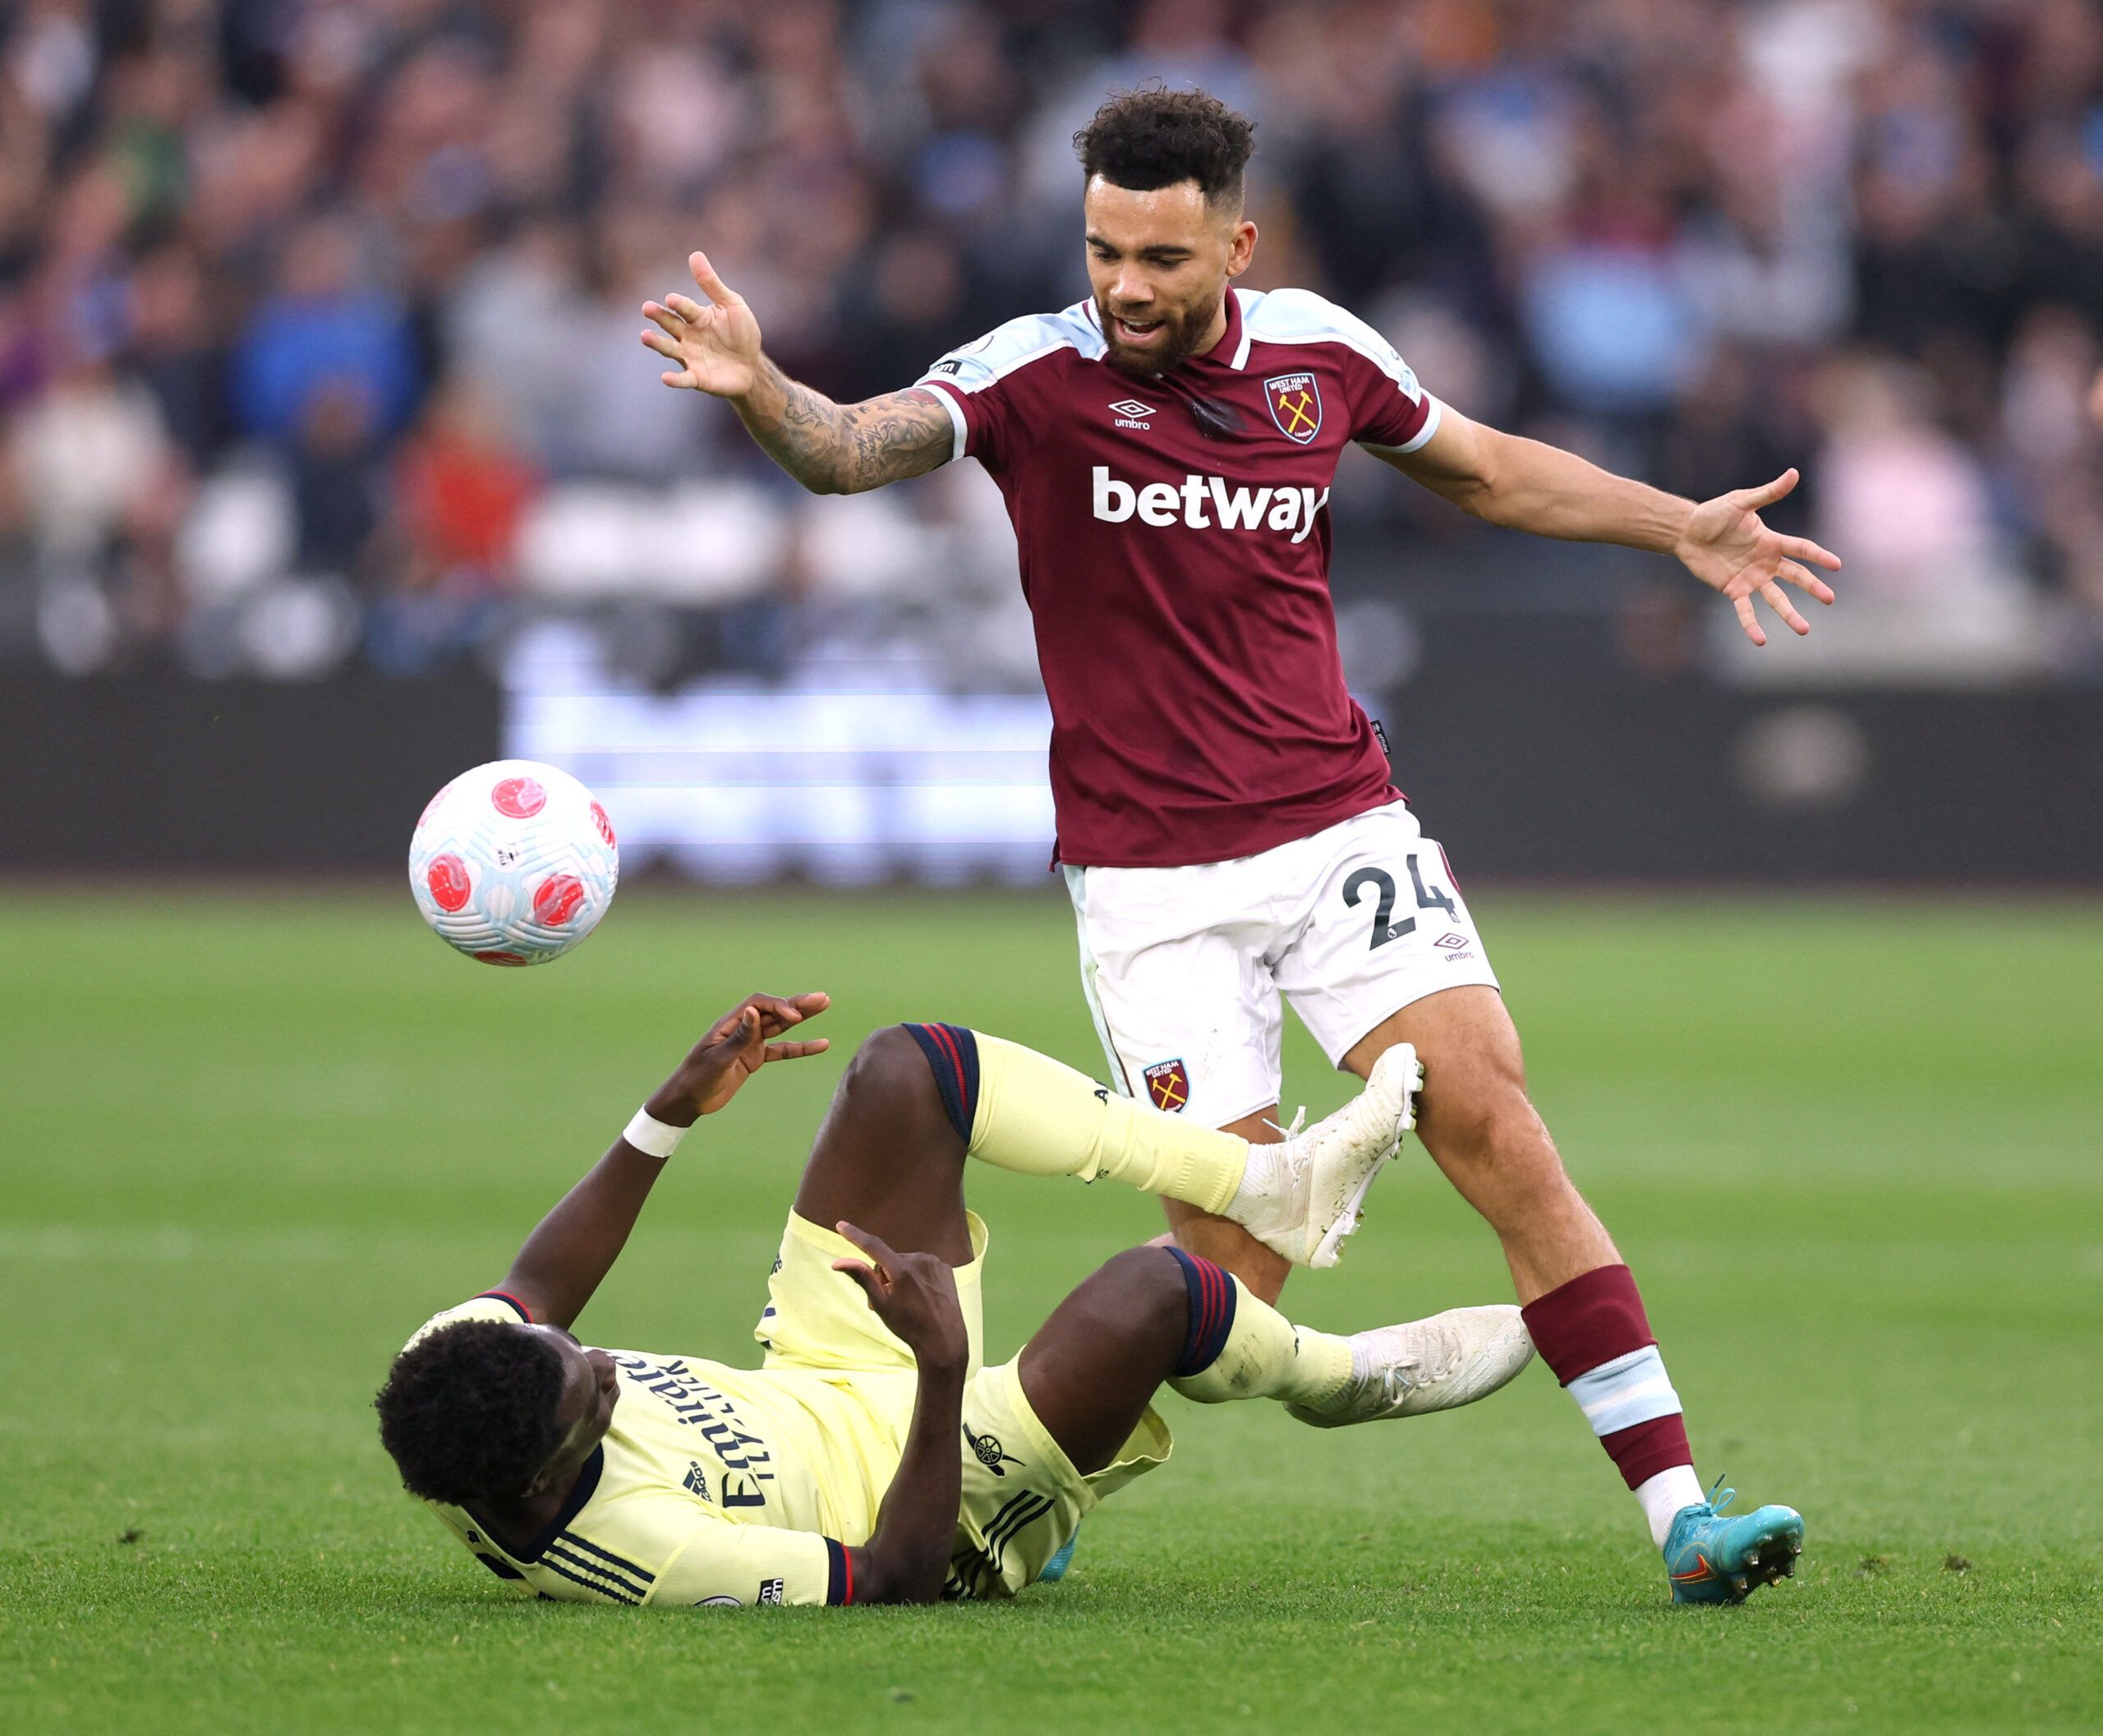 Soccer Football - Premier League - West Ham United v Arsenal - London Stadium, London, Britain - May 1, 2022 Arsenal's Bukayo Saka in action with West Ham United's Ryan Fredericks Action Images via Reuters/Matthew Childs EDITORIAL USE ONLY. No use with unauthorized audio, video, data, fixture lists, club/league logos or 'live' services. Online in-match use limited to 75 images, no video emulation. No use in betting, games or single club /league/player publications.  Please contact your account r